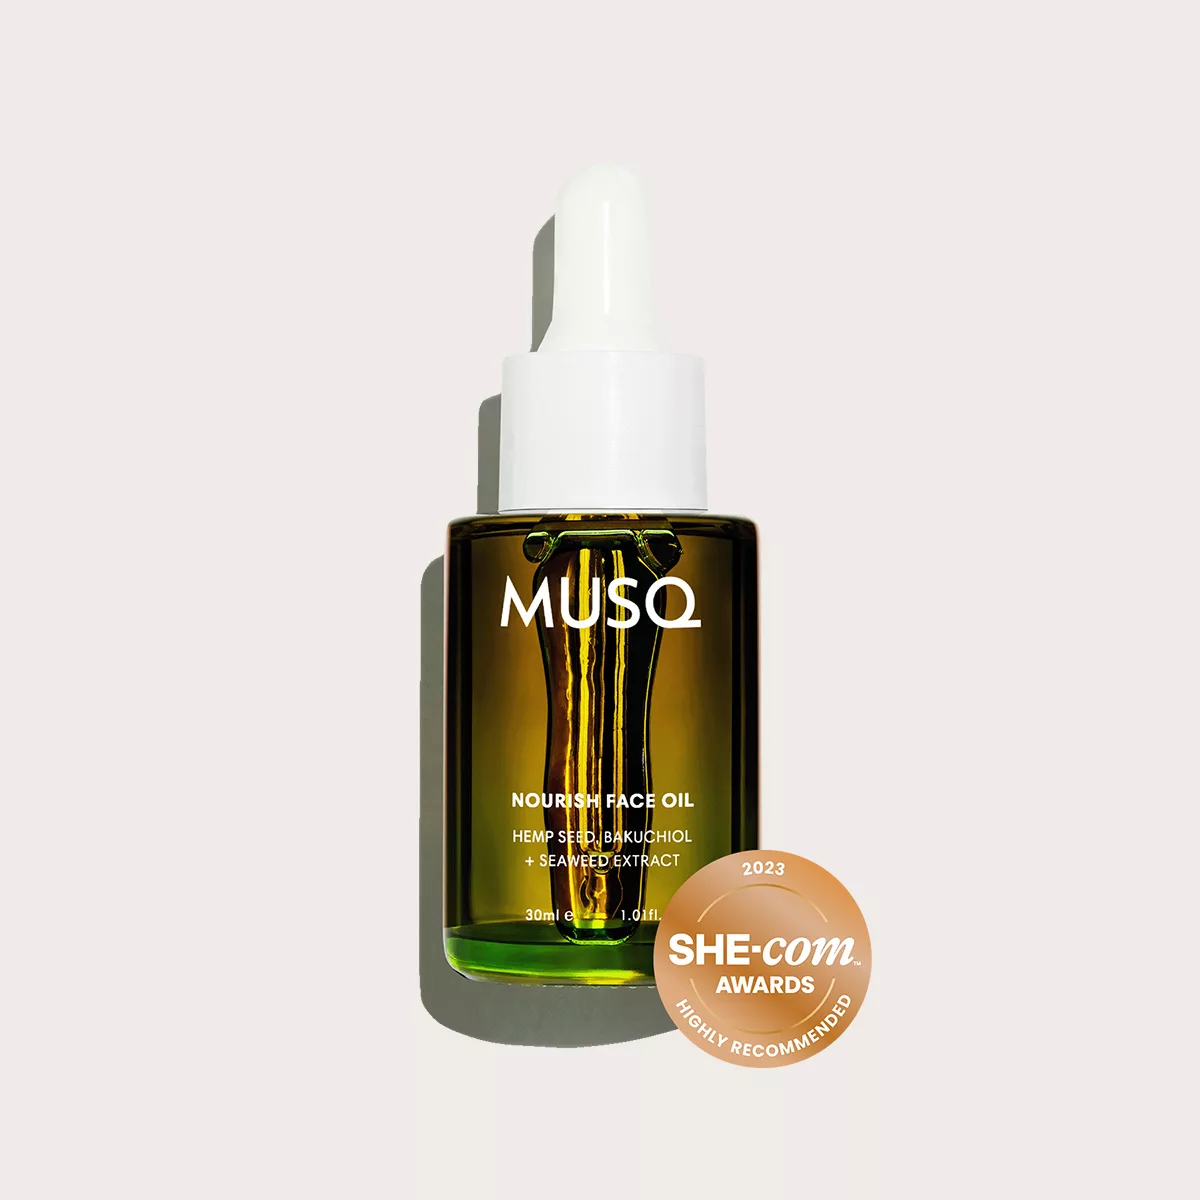 Featured image for “Nourish Face Oil”